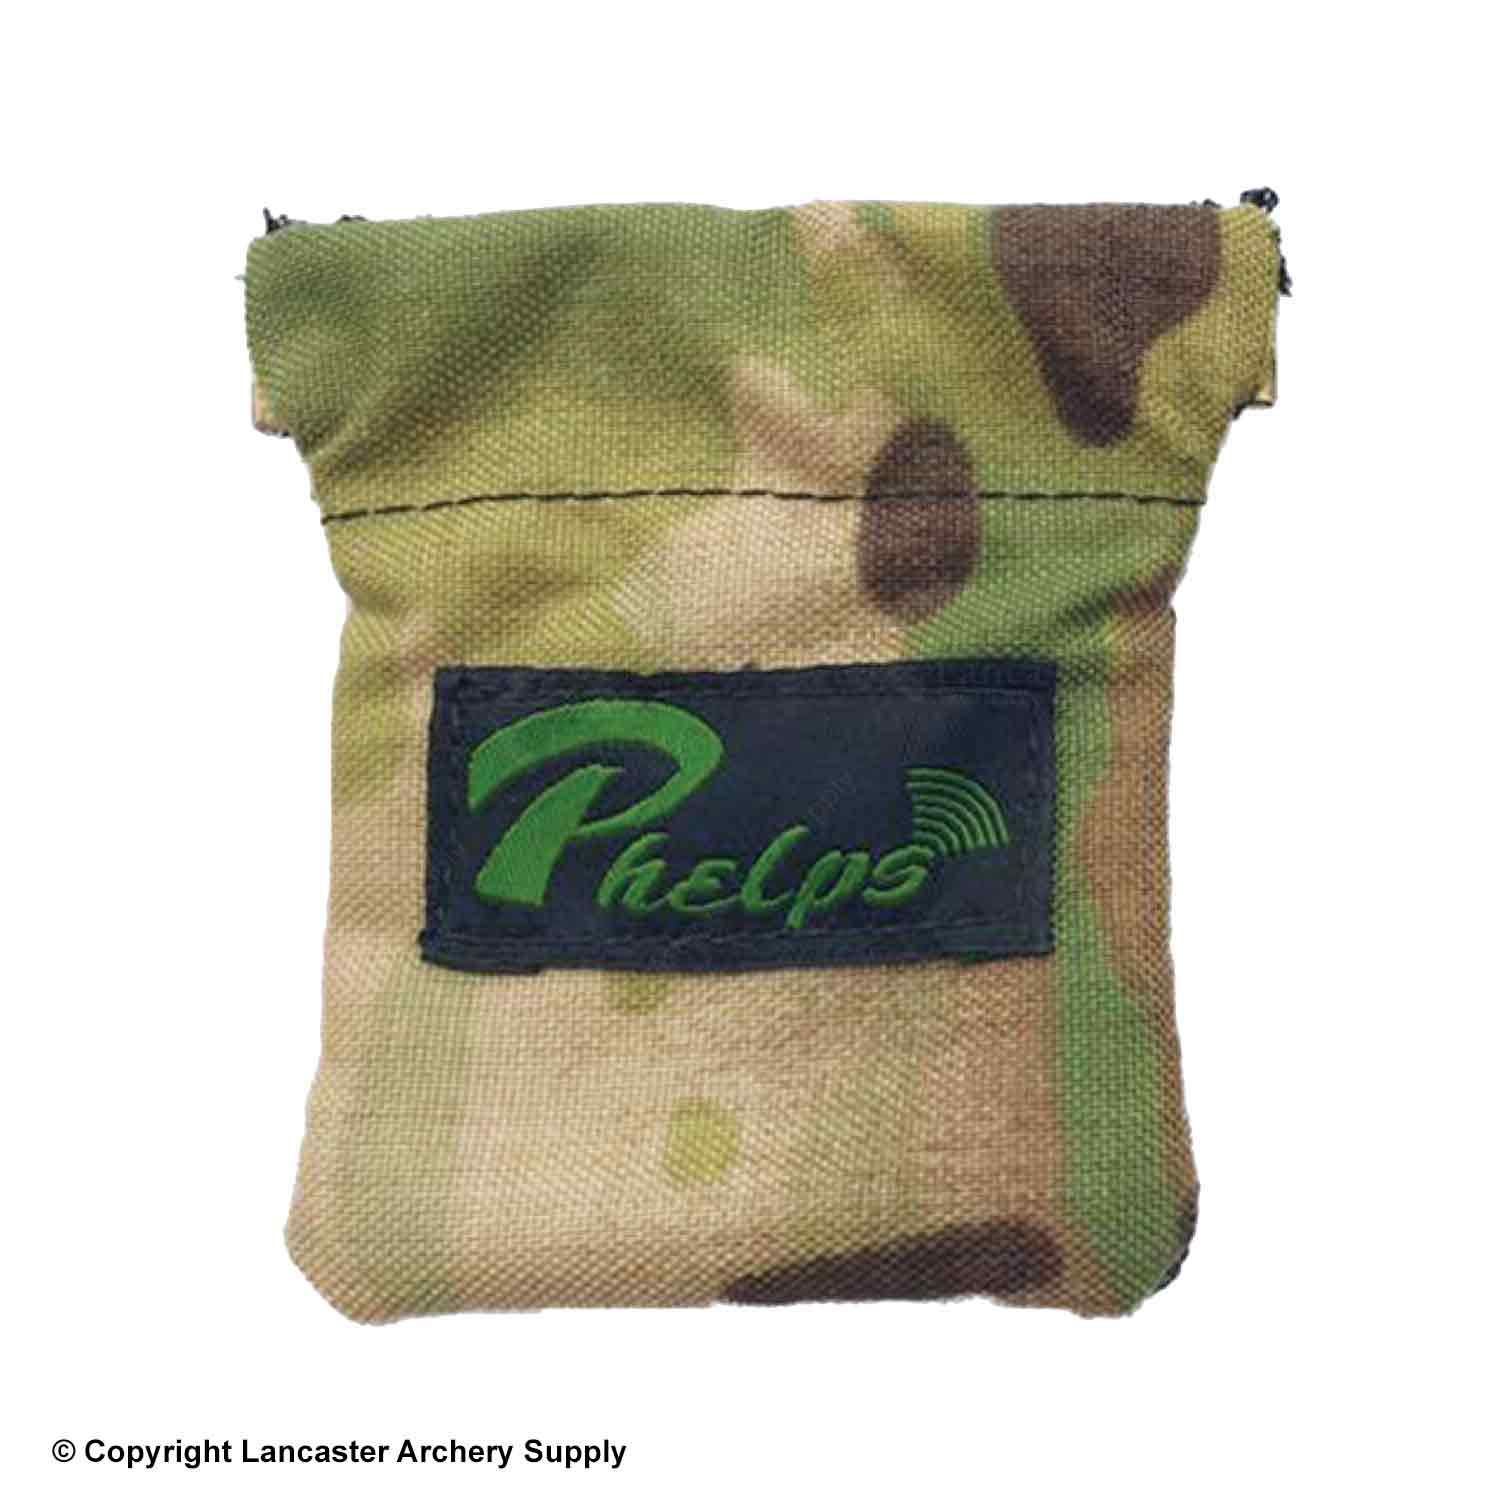 Phelps Game Call Pouch